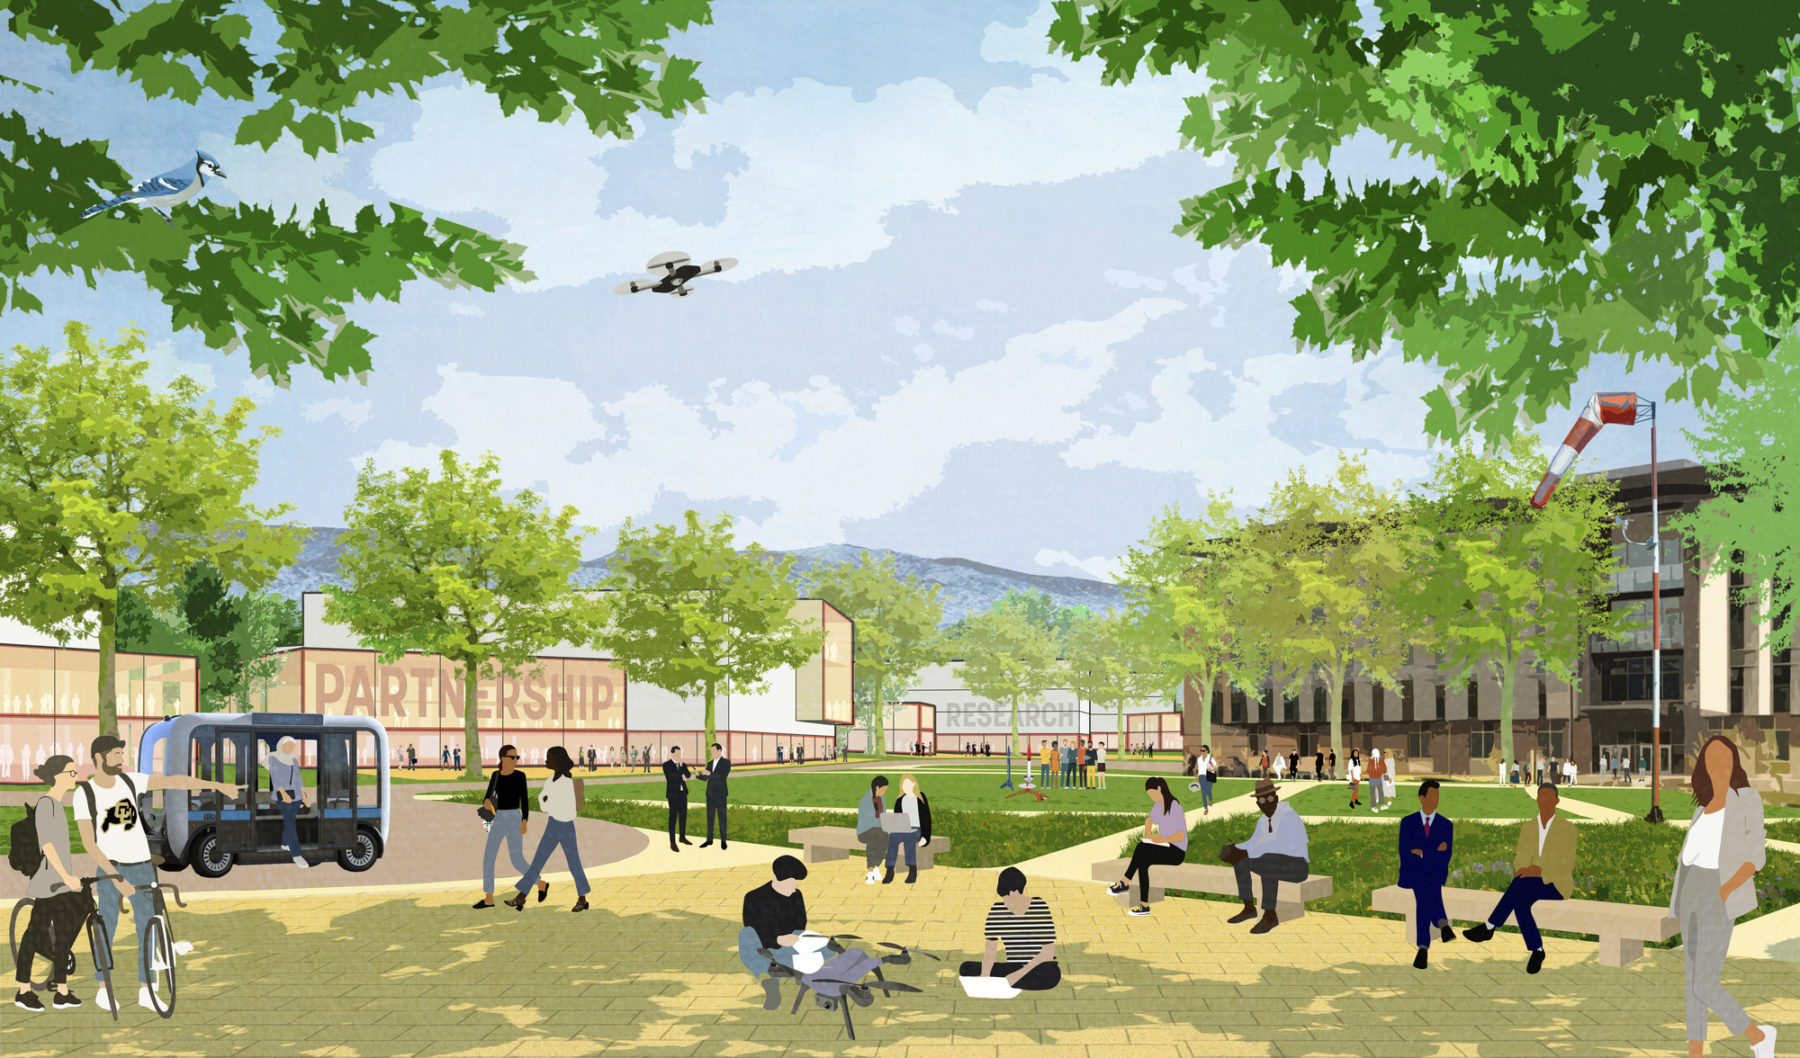 rendering of campus quad - students work on a robotics project in the foreground